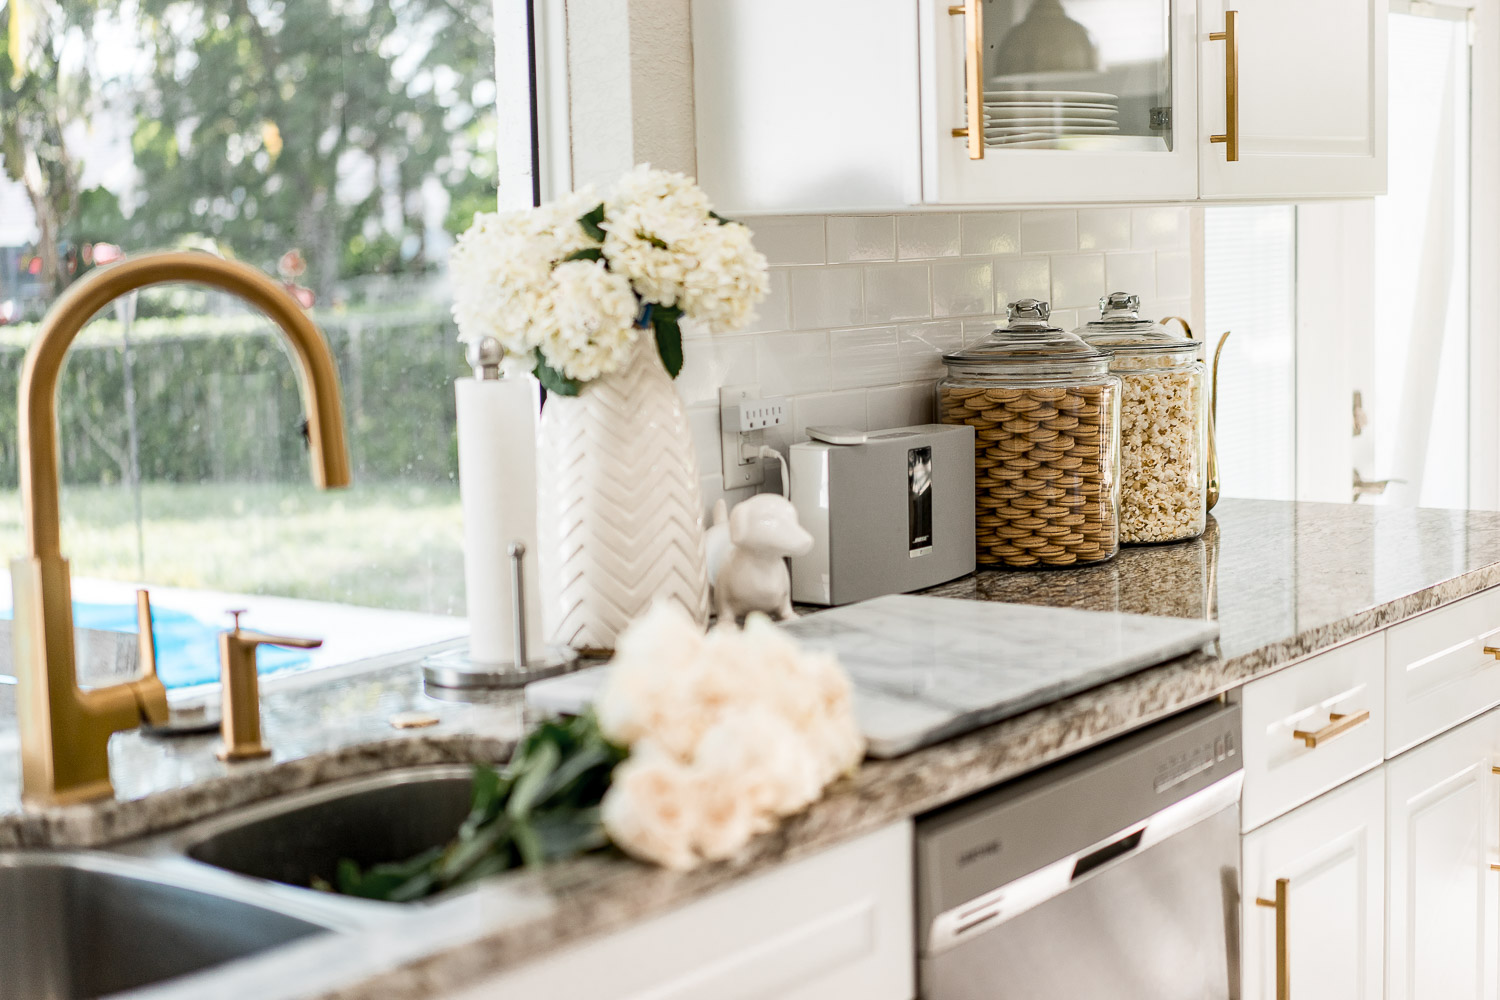 Kitchen Decor Refresh with Stage - A Glam Lifestyle